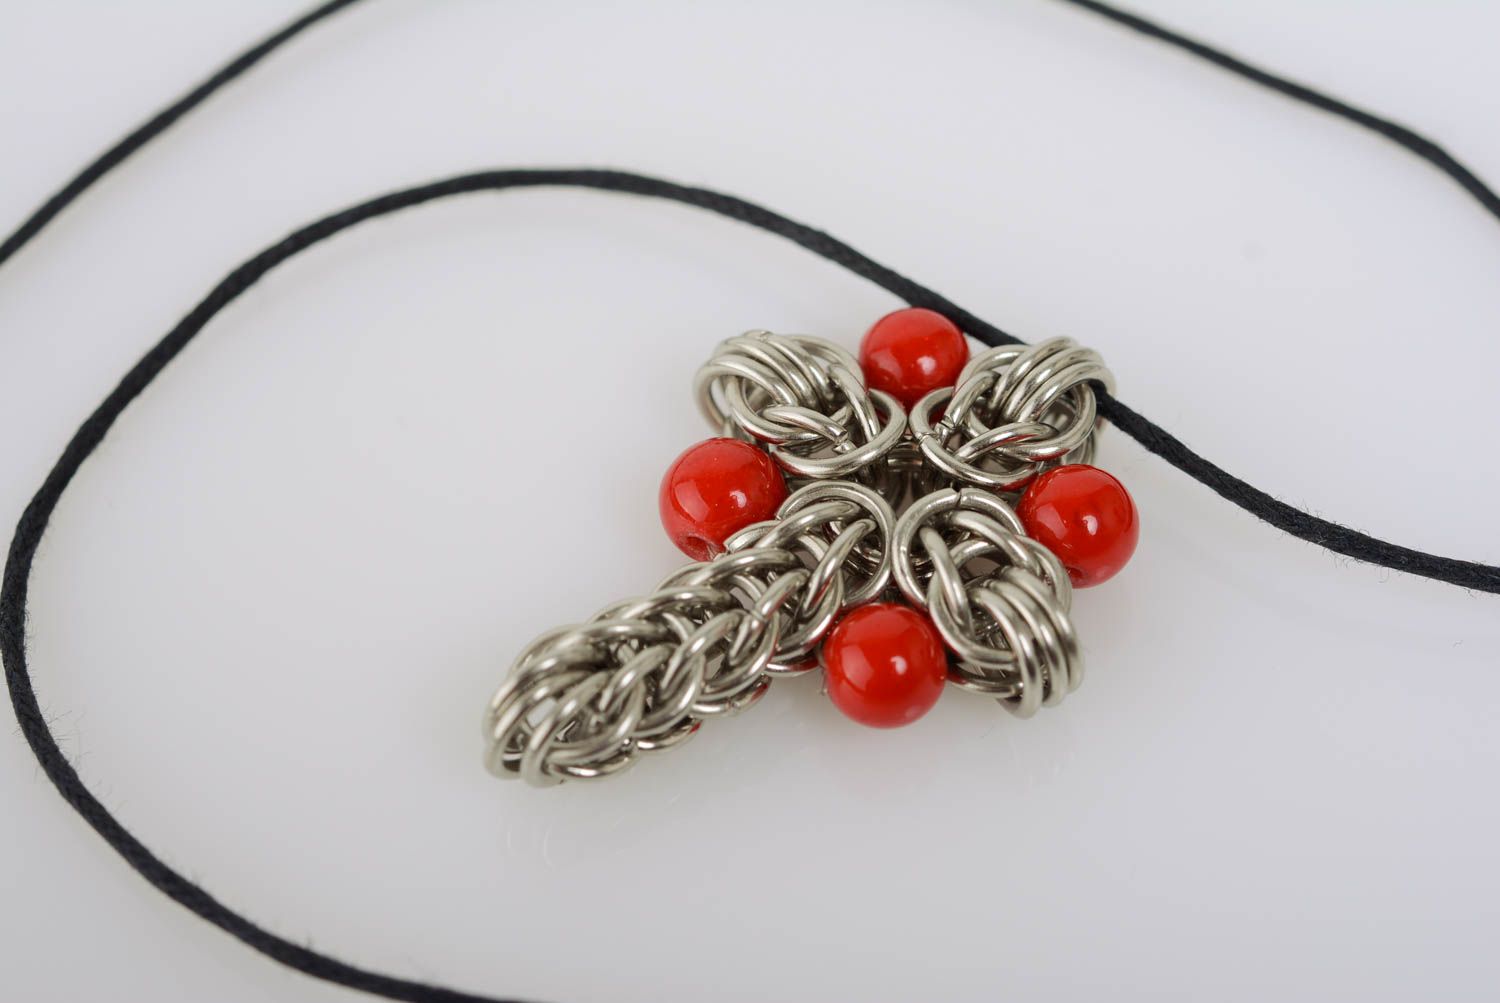 Handmade metal cross chain mail weaving on cord with red beads gift for girl photo 1